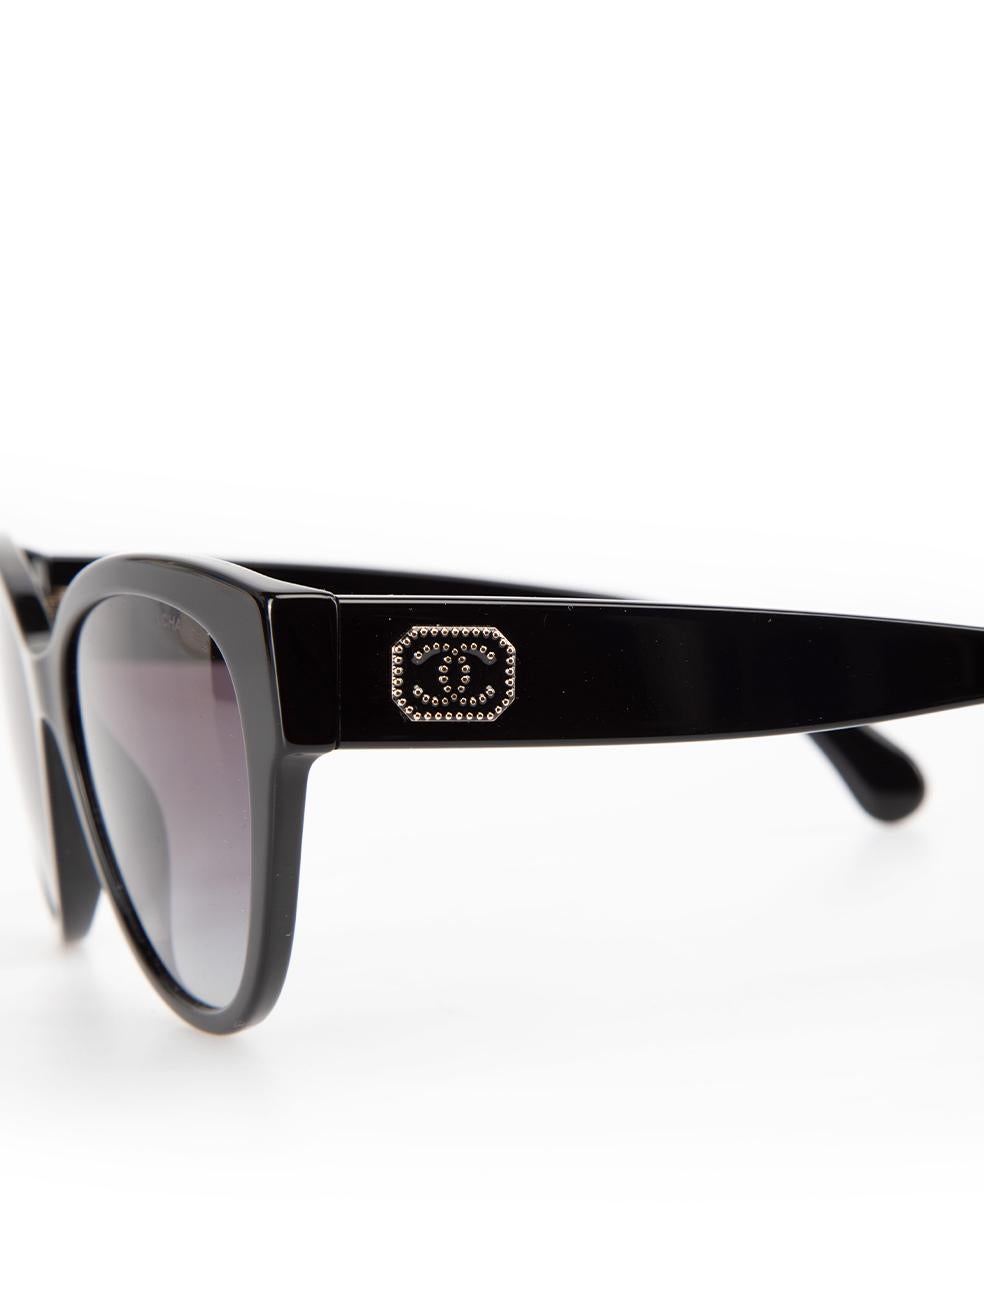 Chanel Black Butterfly Gradient Lens Sunglasses For Sale 2